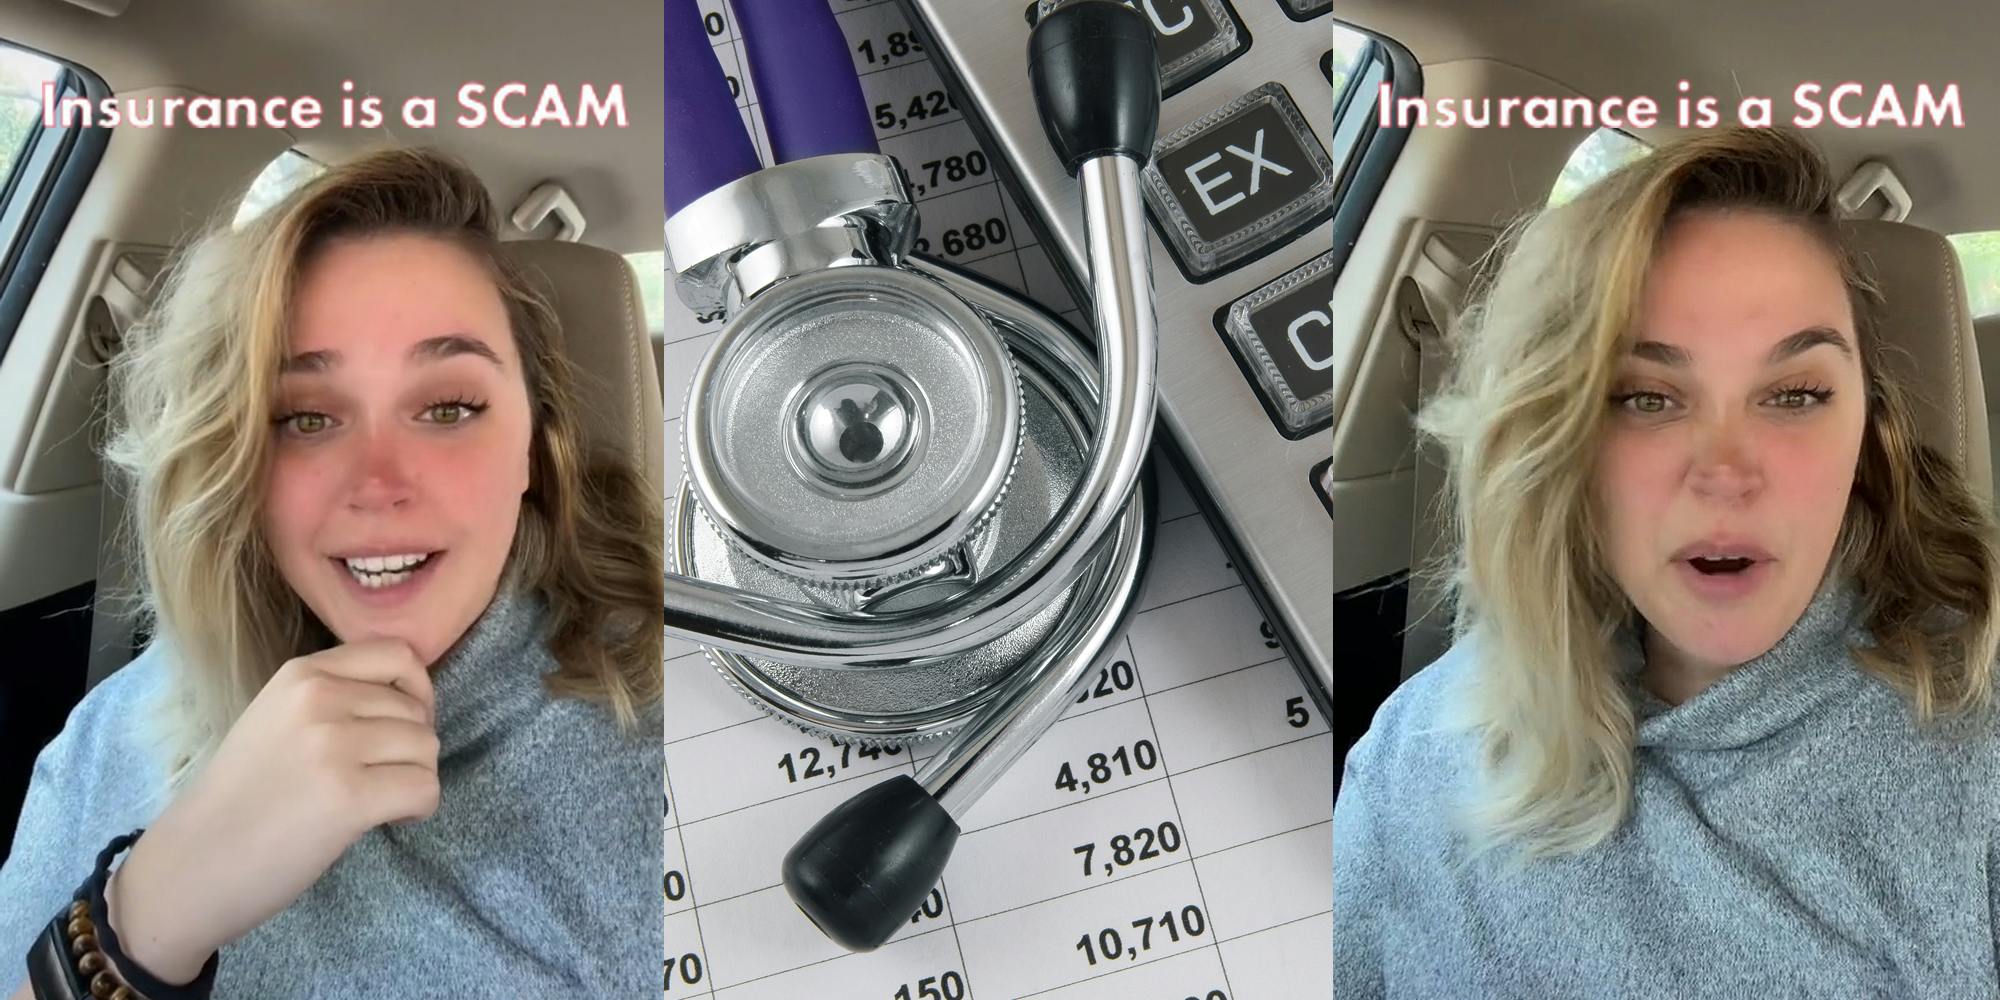 woman speaking in car caption "Insurance is a SCAM" (l) Stethoscope with bills and calculator (c) woman speaking in car caption "Insurance is a SCAM" (r)